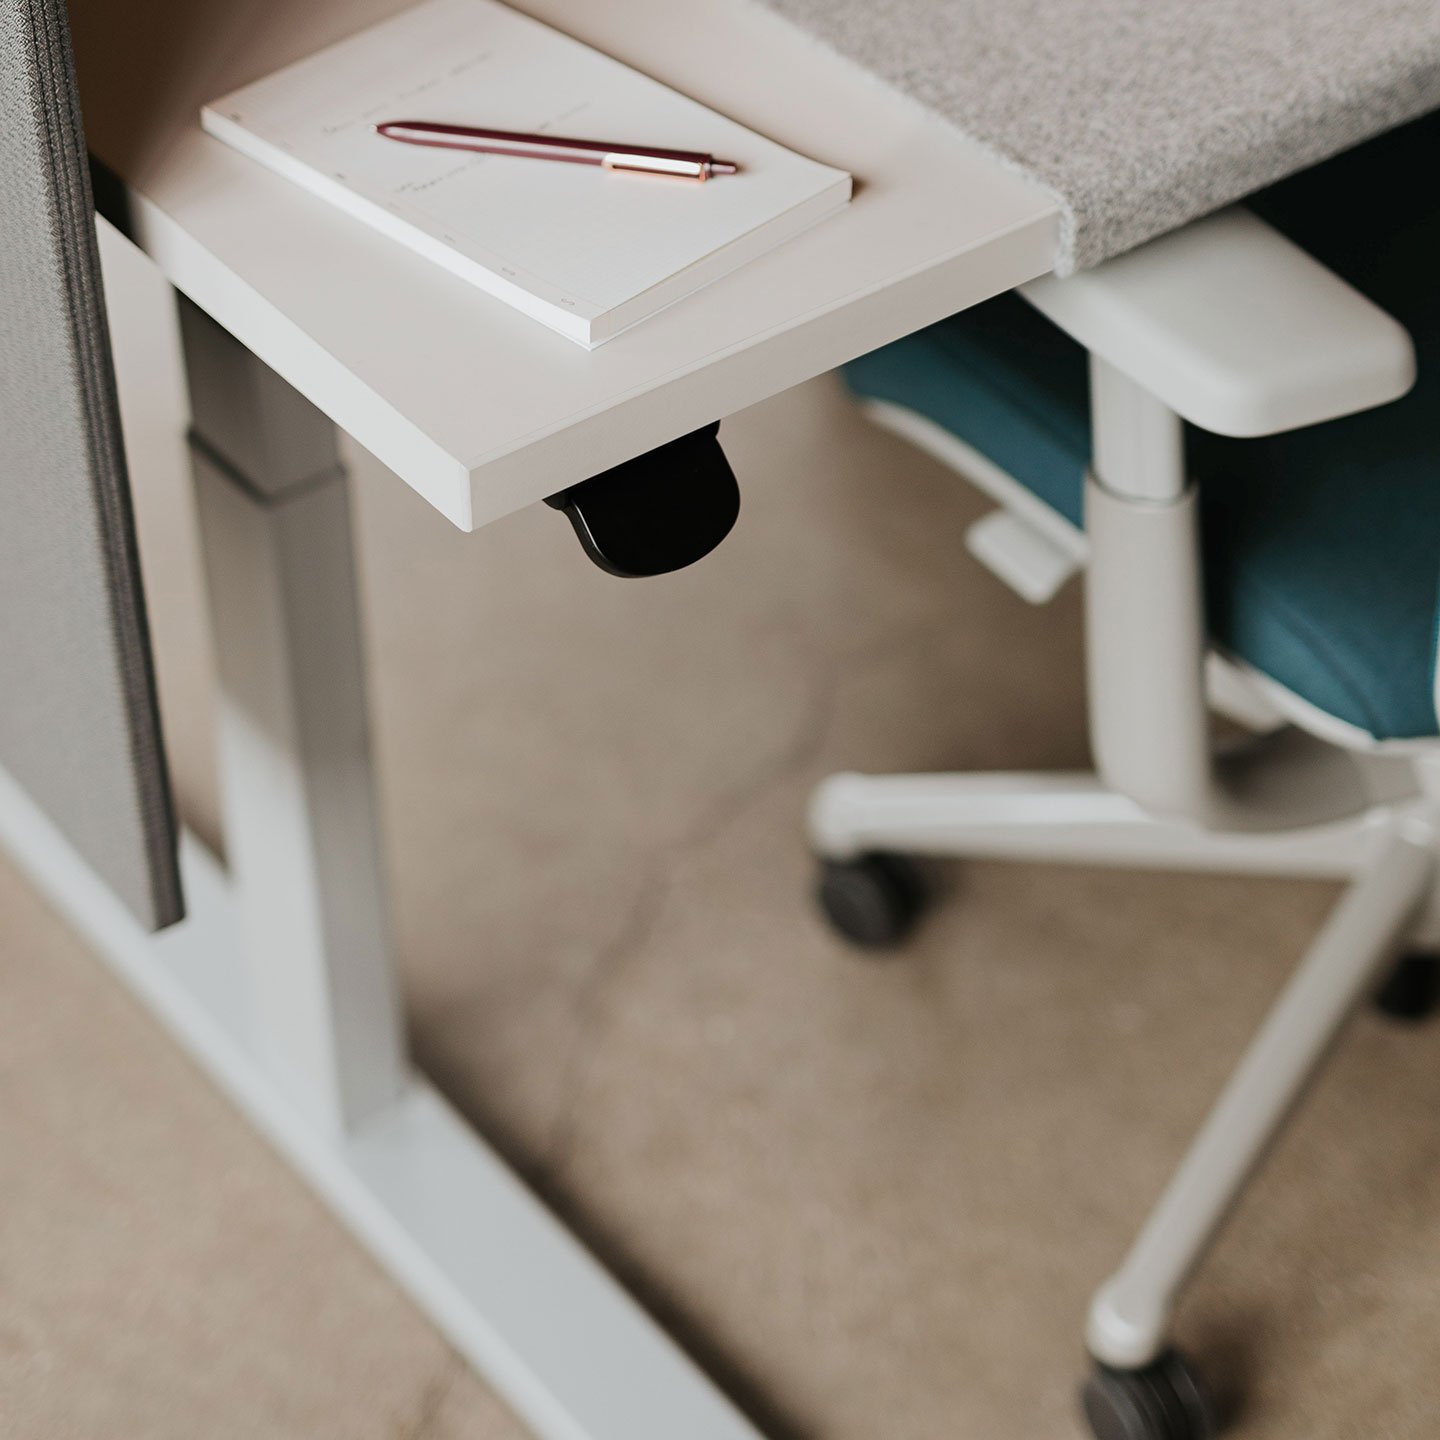 Haworth Upside Height Adjustable Table with pen and paper on it with haworth desk chair